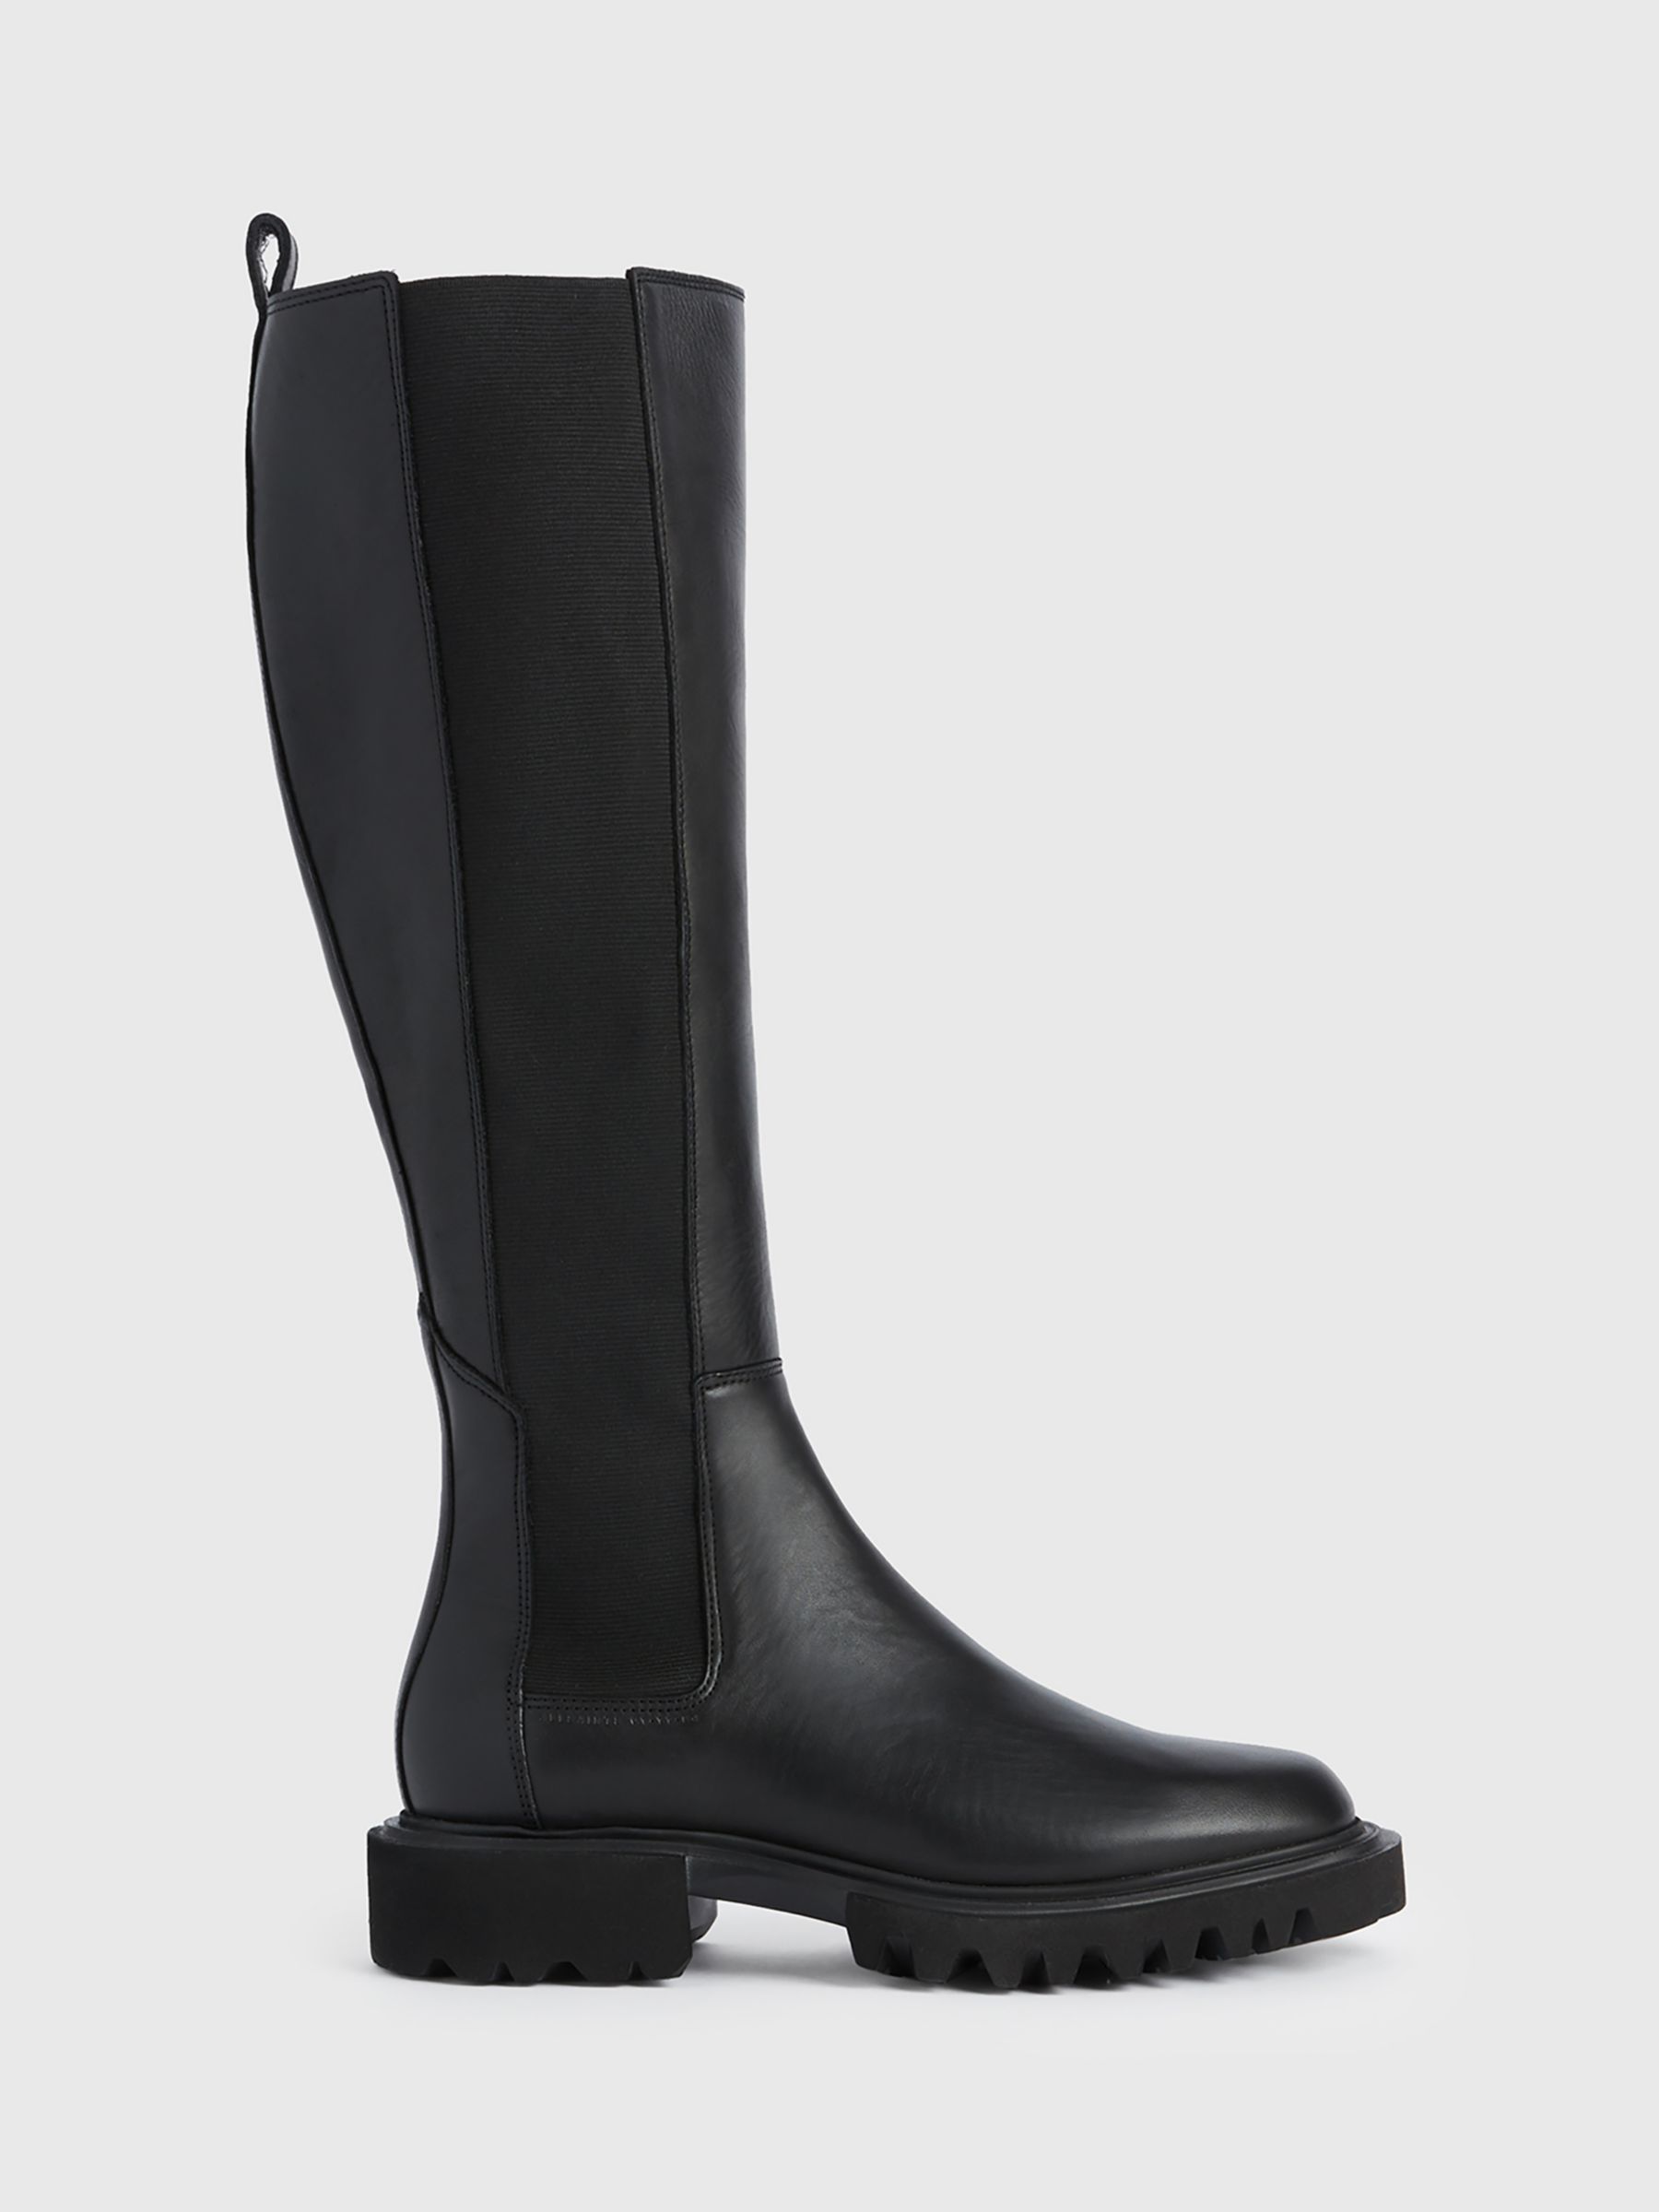 AllSaints Maeve Leather Knee High Boots, Black, 4